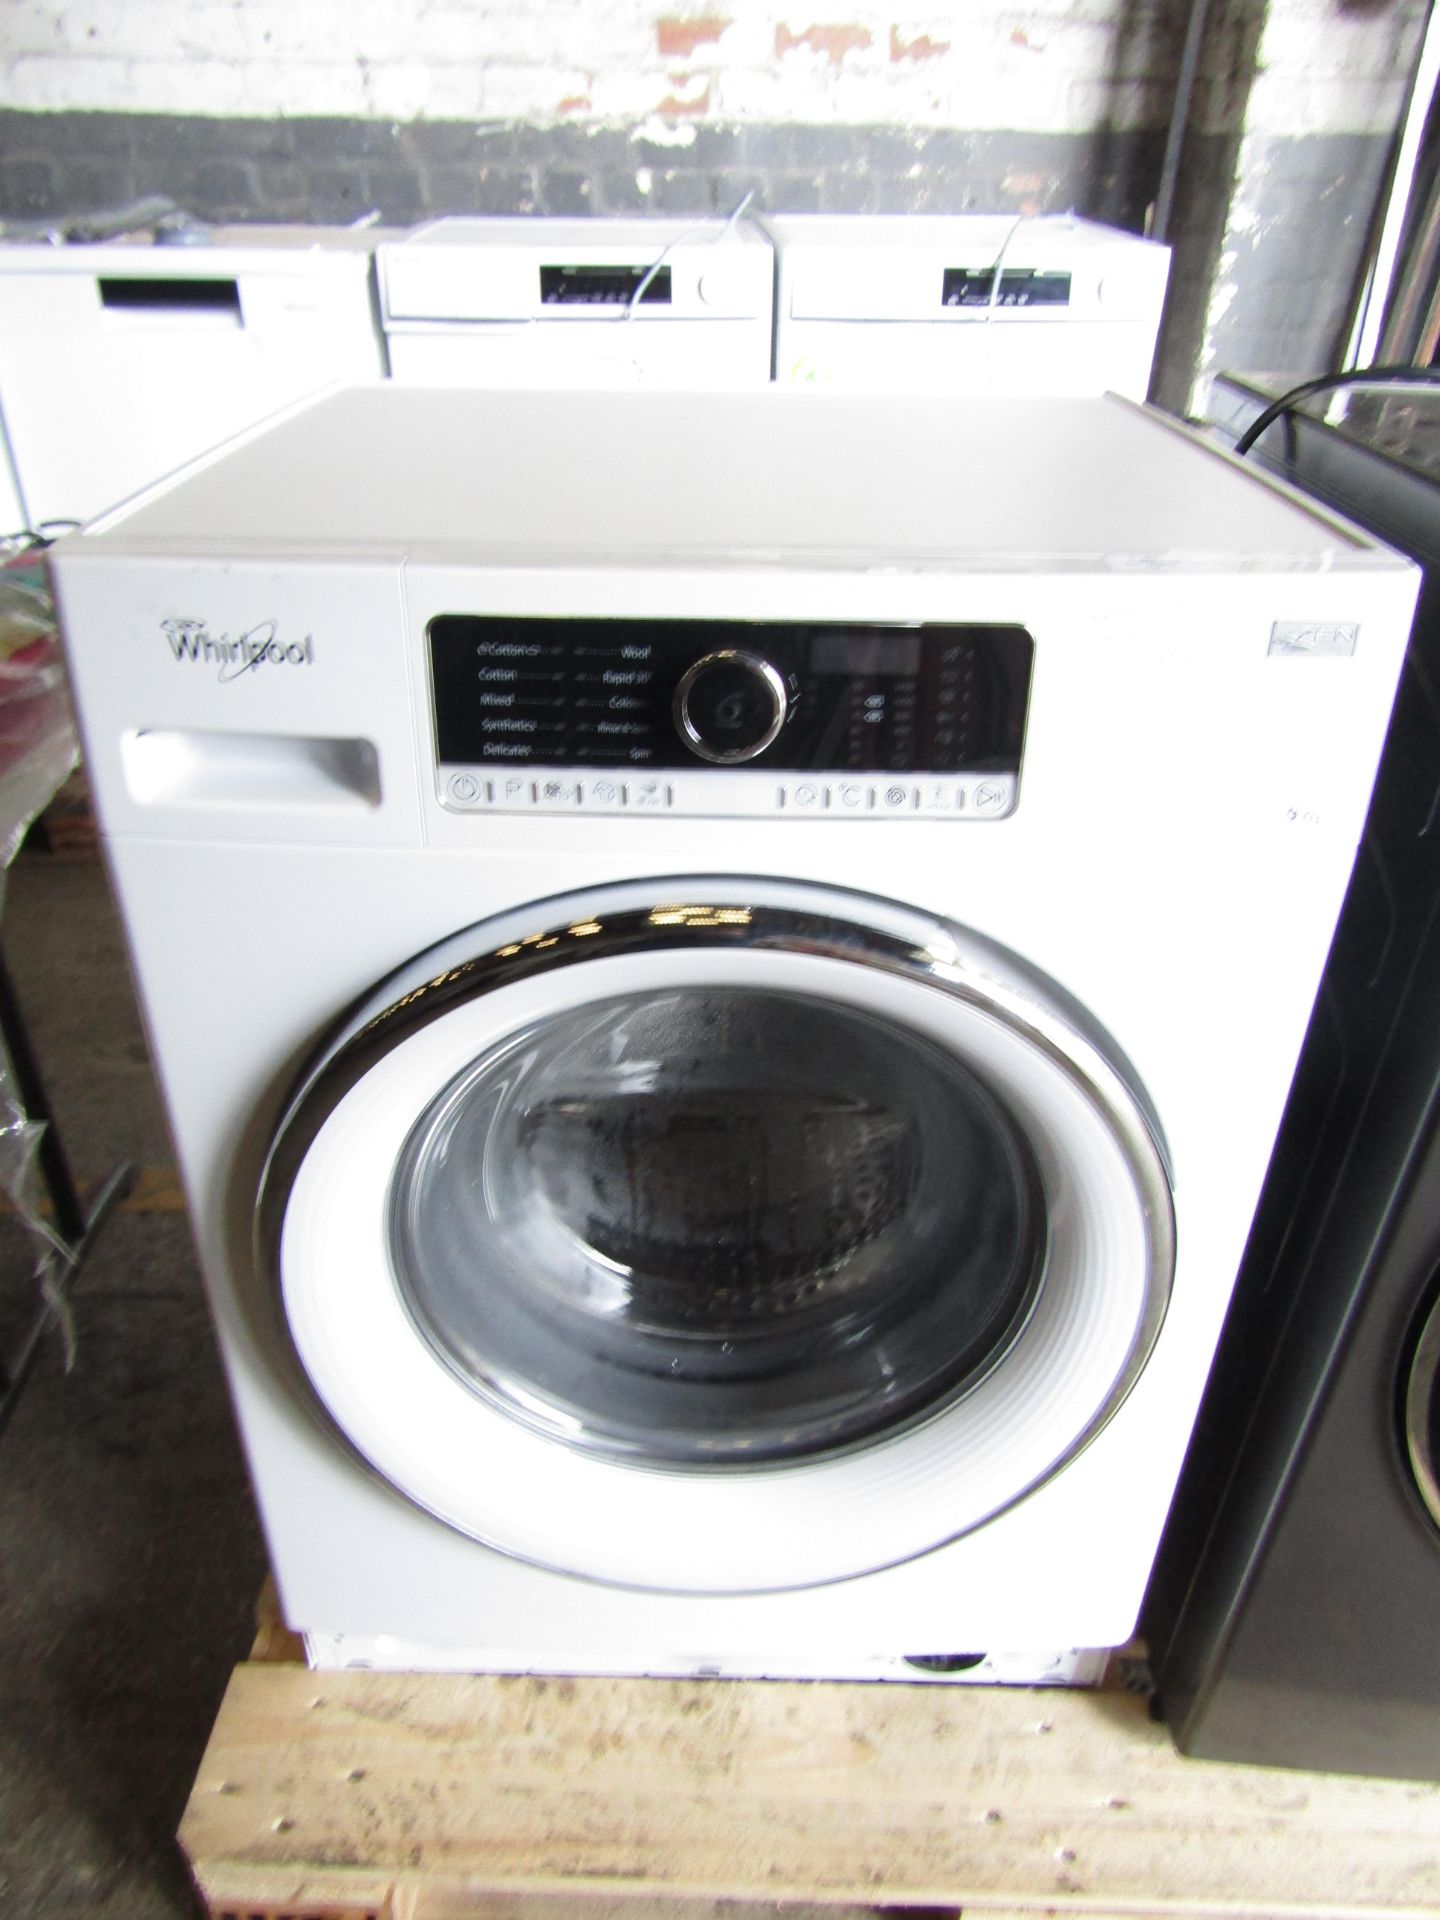 Whirlpool 9KG washing machine, powers onoa dn a spin, we ahvent conencted it to ewater or checked